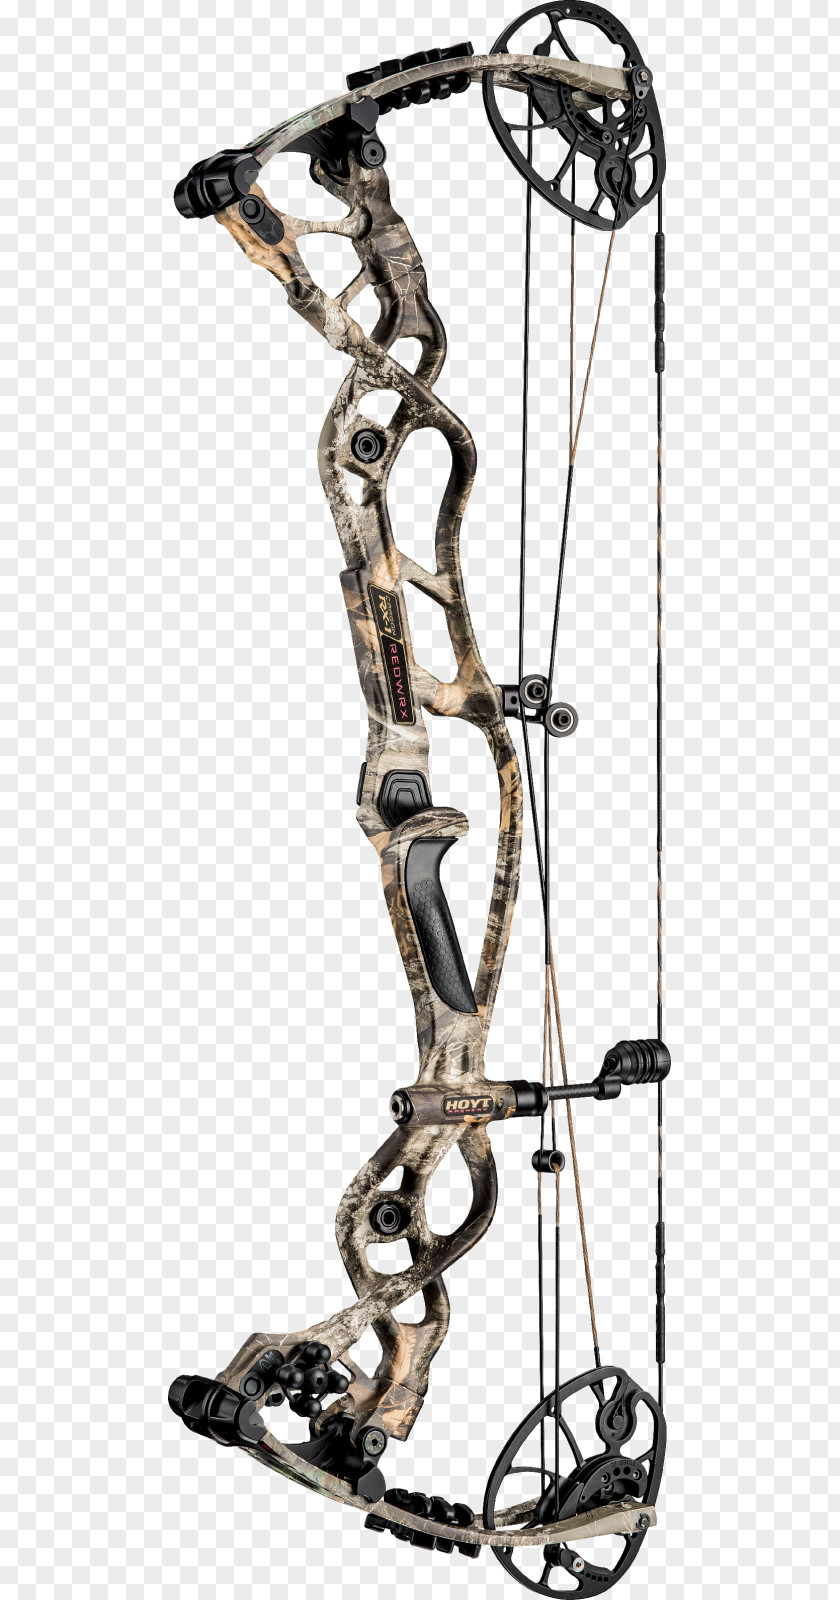 Compound Bows Bow And Arrow Bowhunting Archery PNG